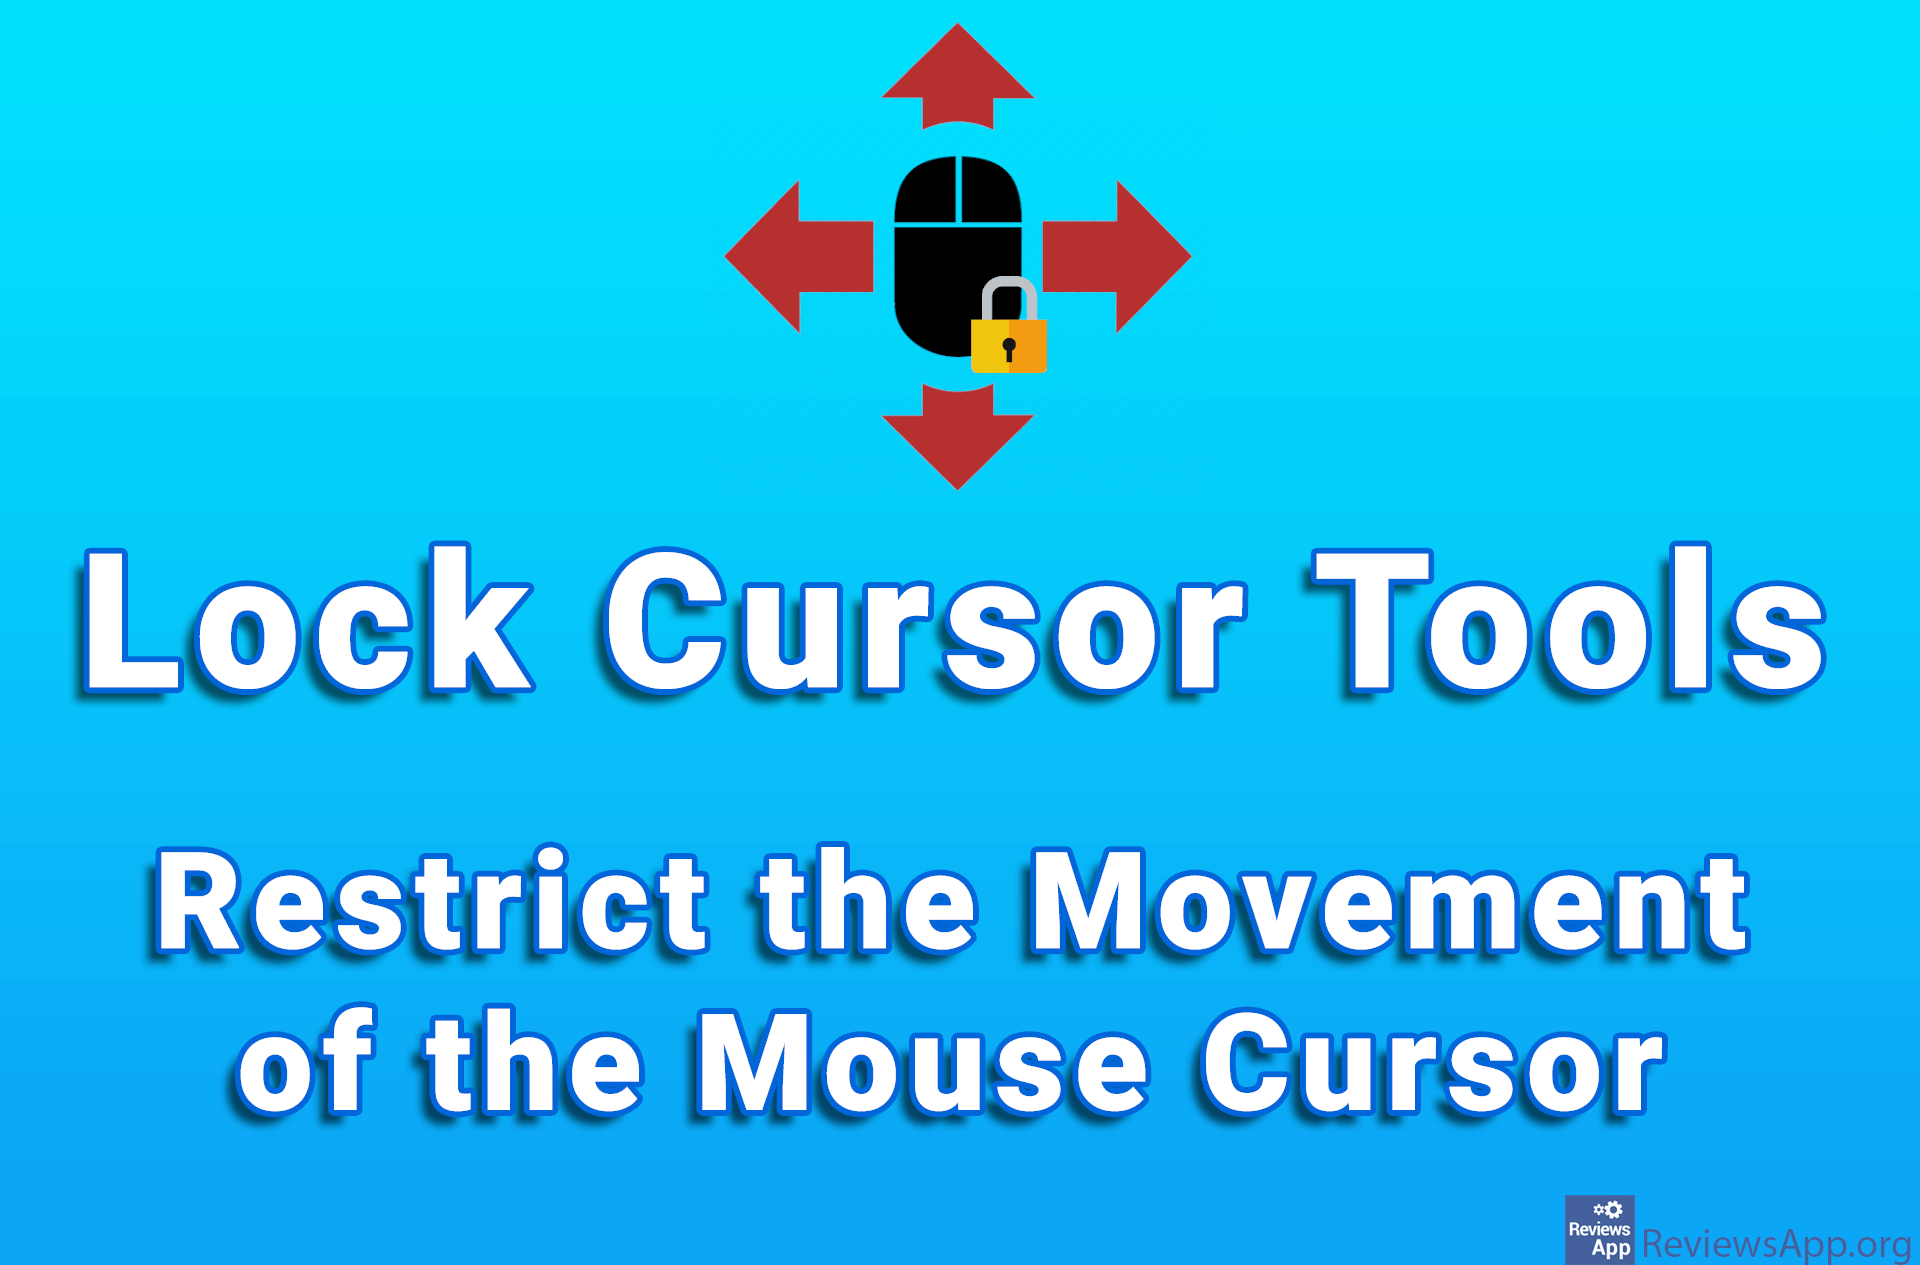 Lock Cursor Tools – Restrict the Movement of the Mouse Cursor